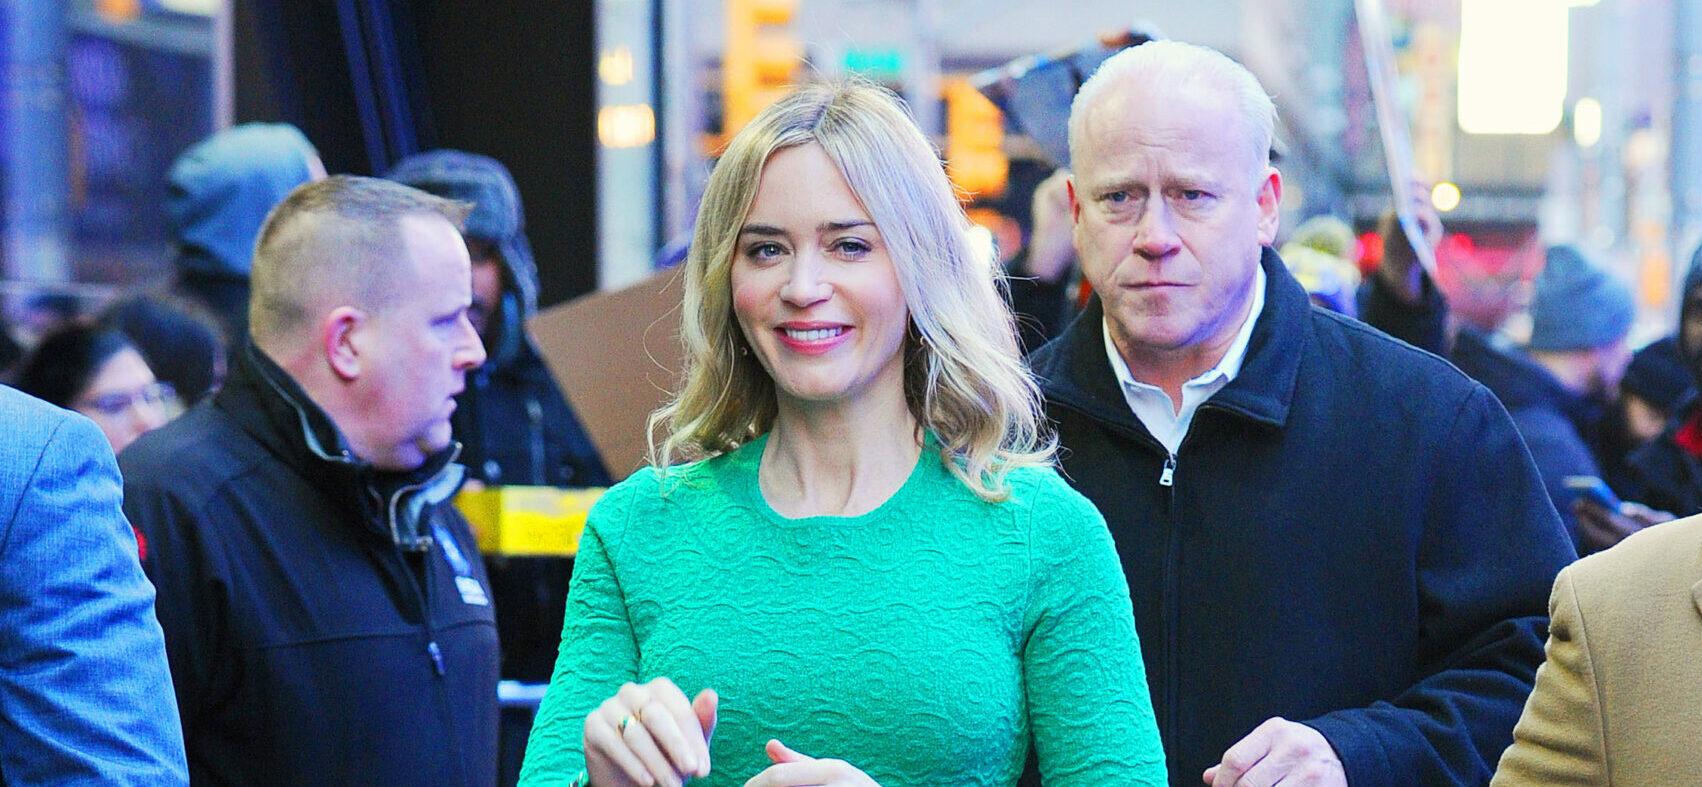 Emily Blunt looks stunning in an emerald bodycon dress as she stops by the GMA